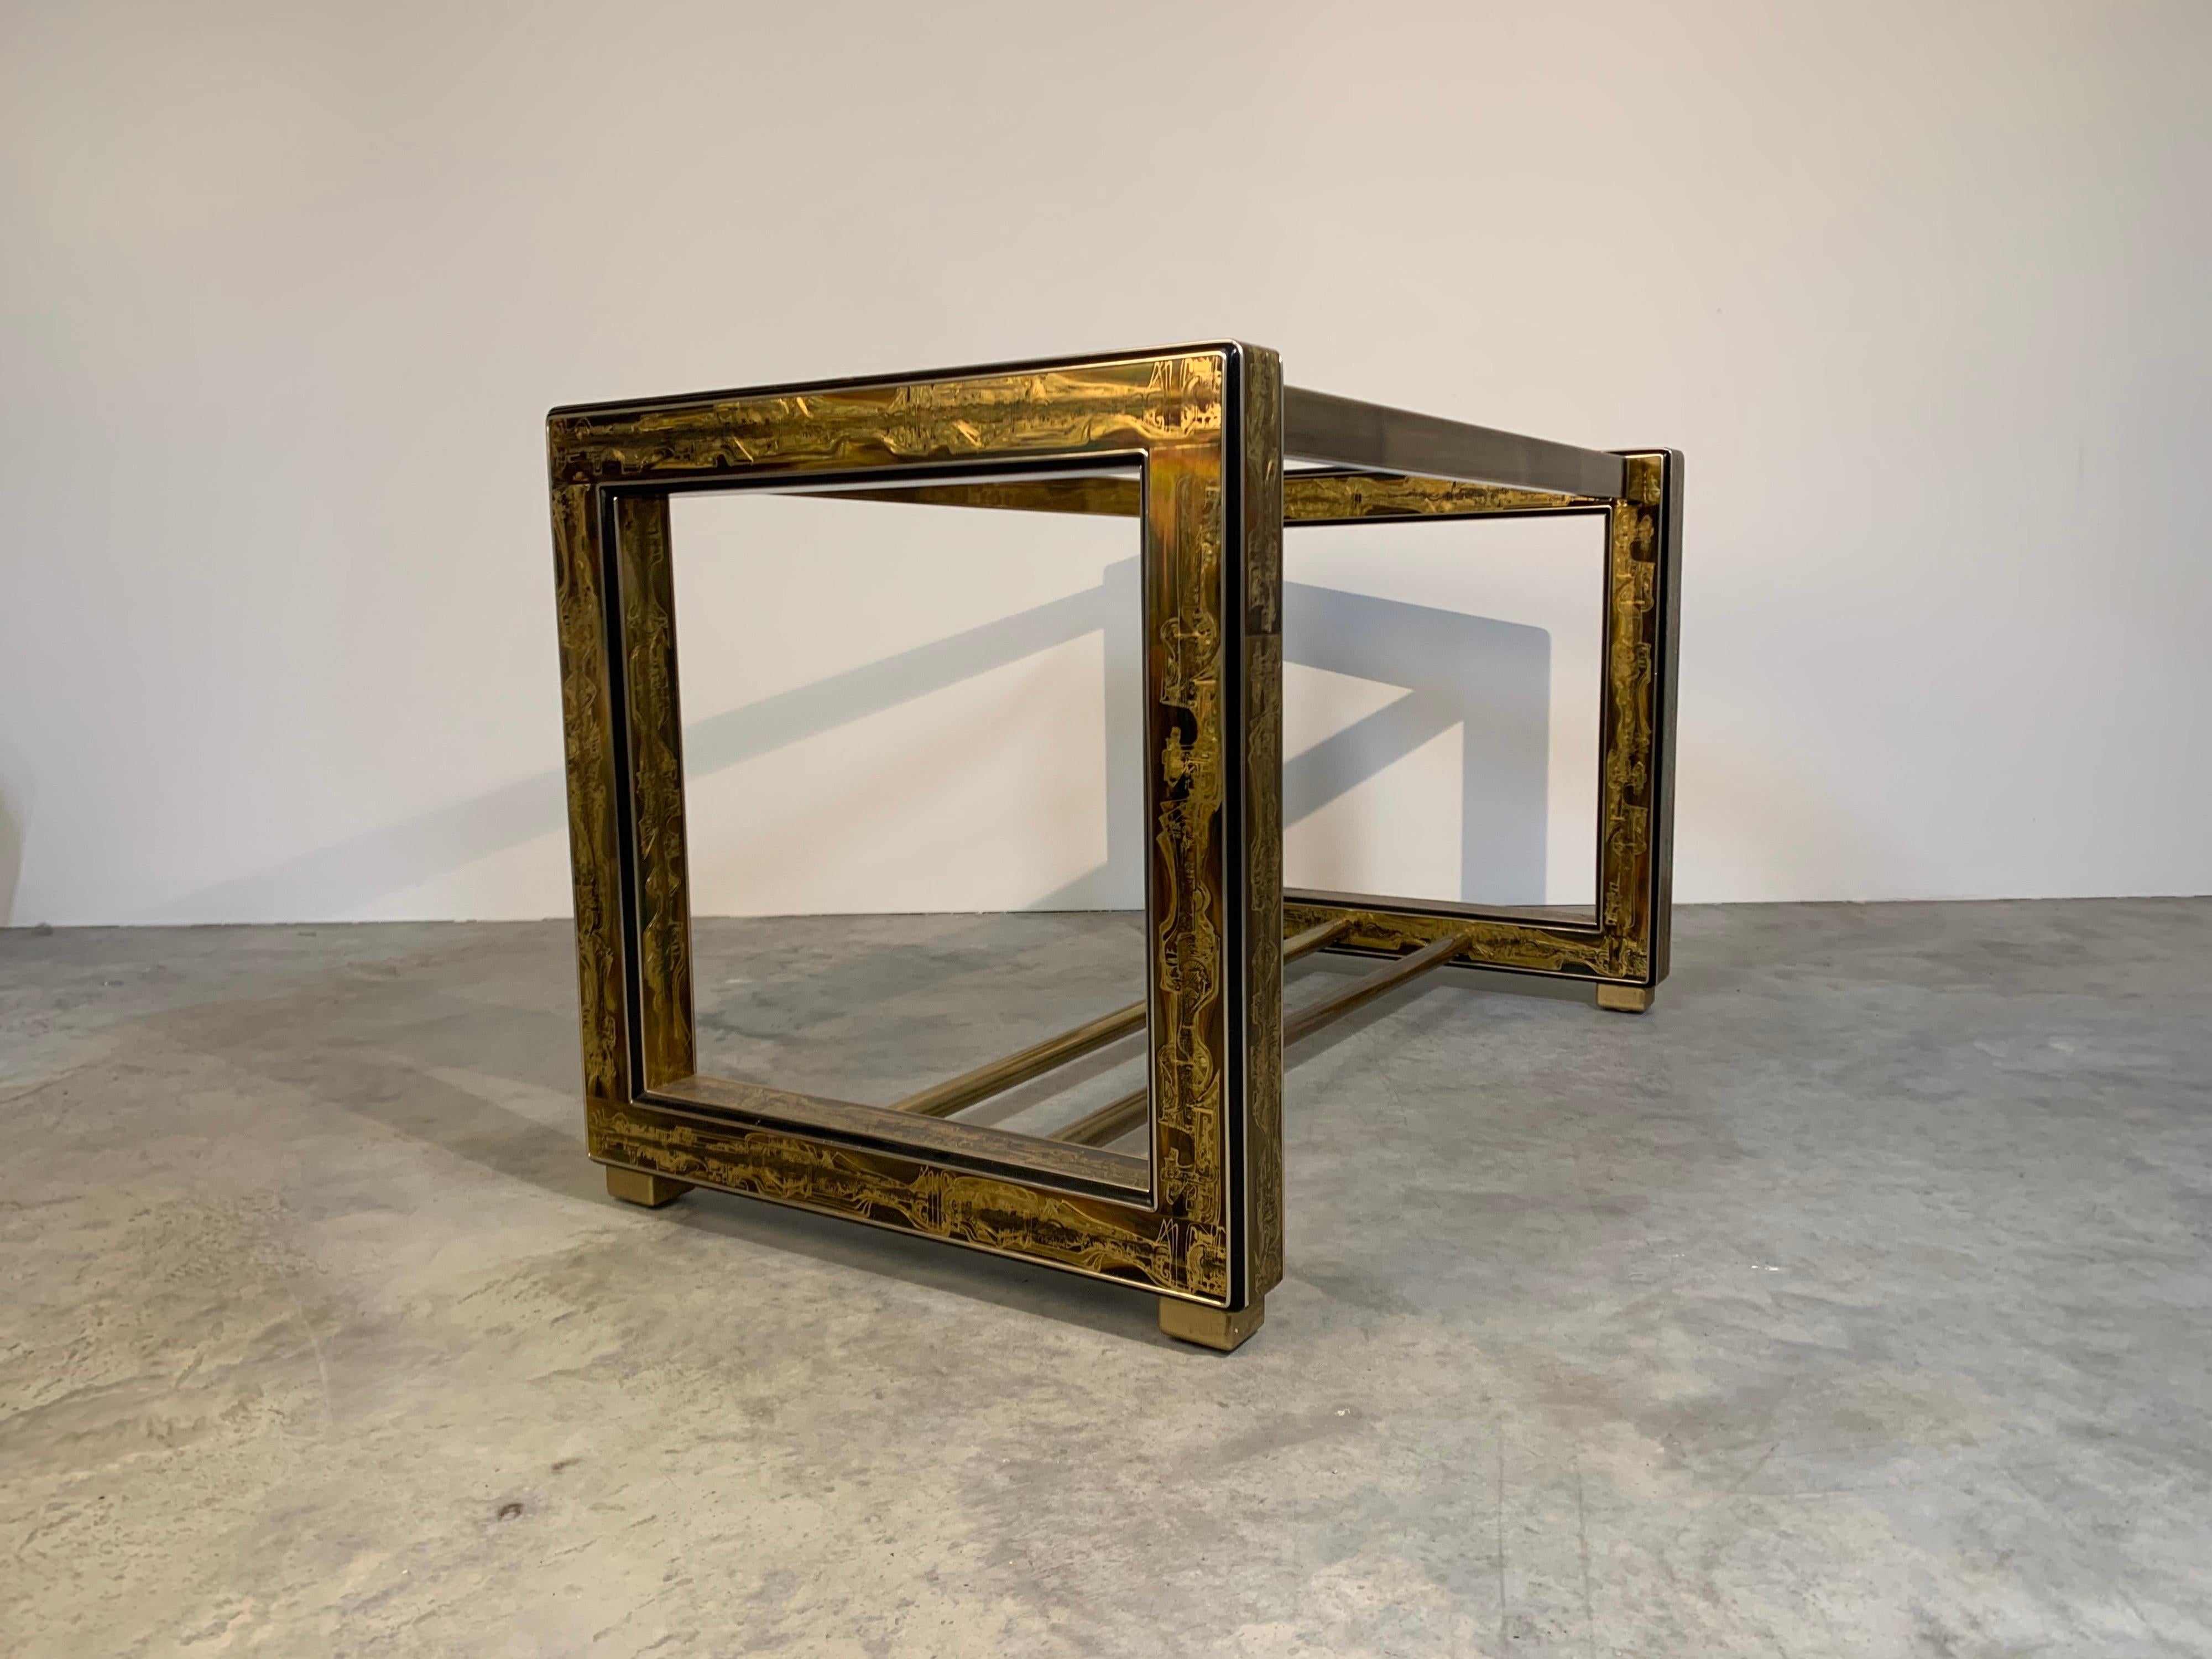 An exquisite example of Bernhard Rohne beautiful acid etched chinoiserie series. No 2 tables are alike.
This particular example is in the finest condition that we’ve ever seen. It is breathtaking.
Listing is for the table base only. We can assist